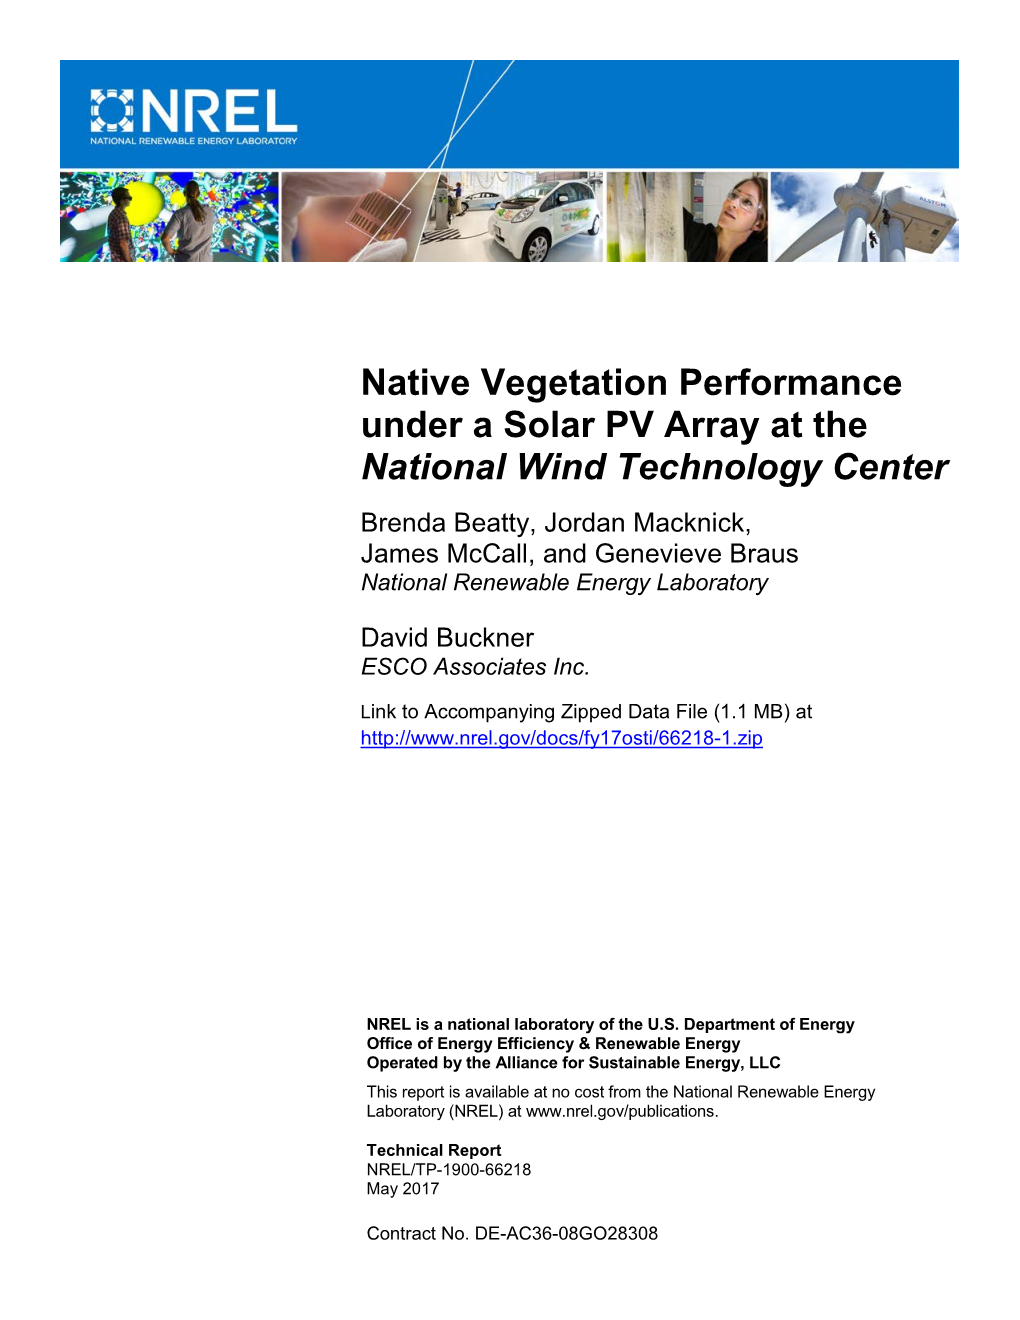 Native Vegetation Performance Under a Solar PV Array at the National